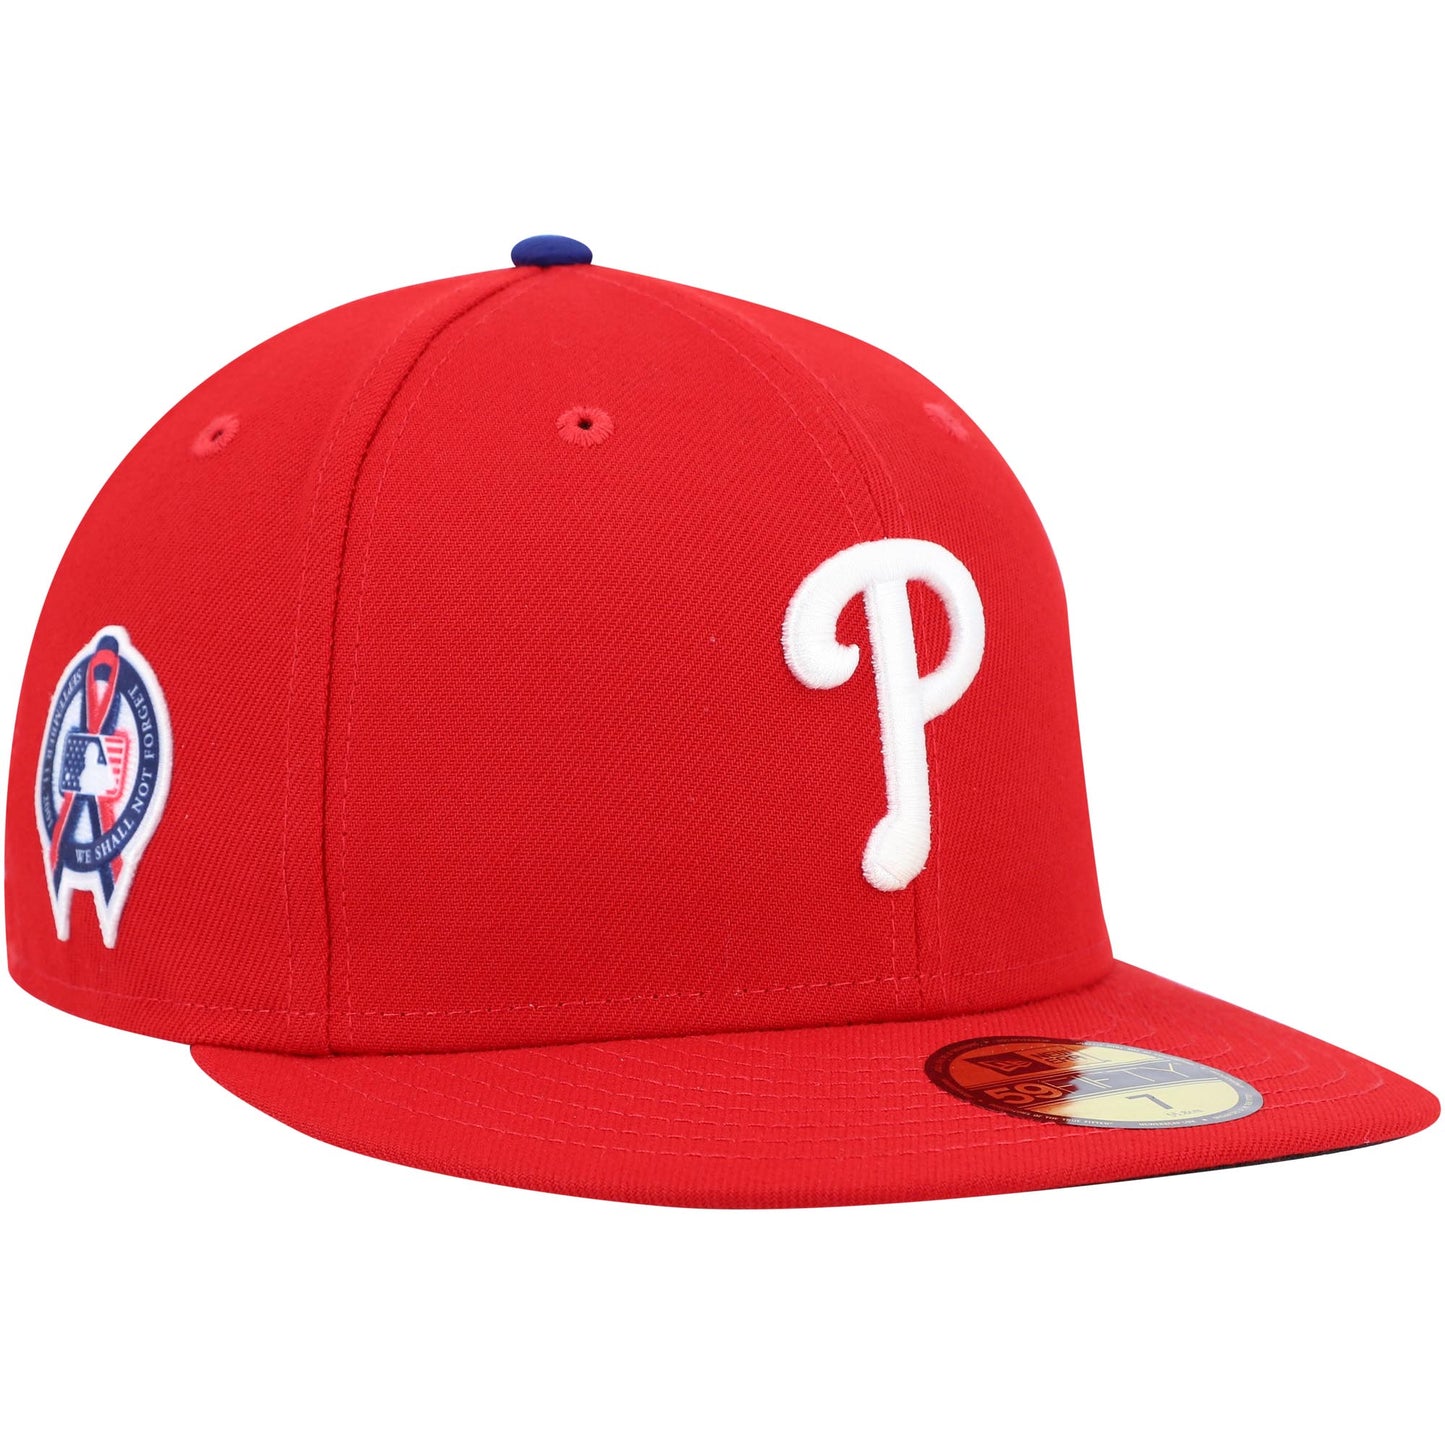 Philadelphia Phillies New Era 9/11 Memorial Side Patch 59FIFTY Fitted Hat - Red